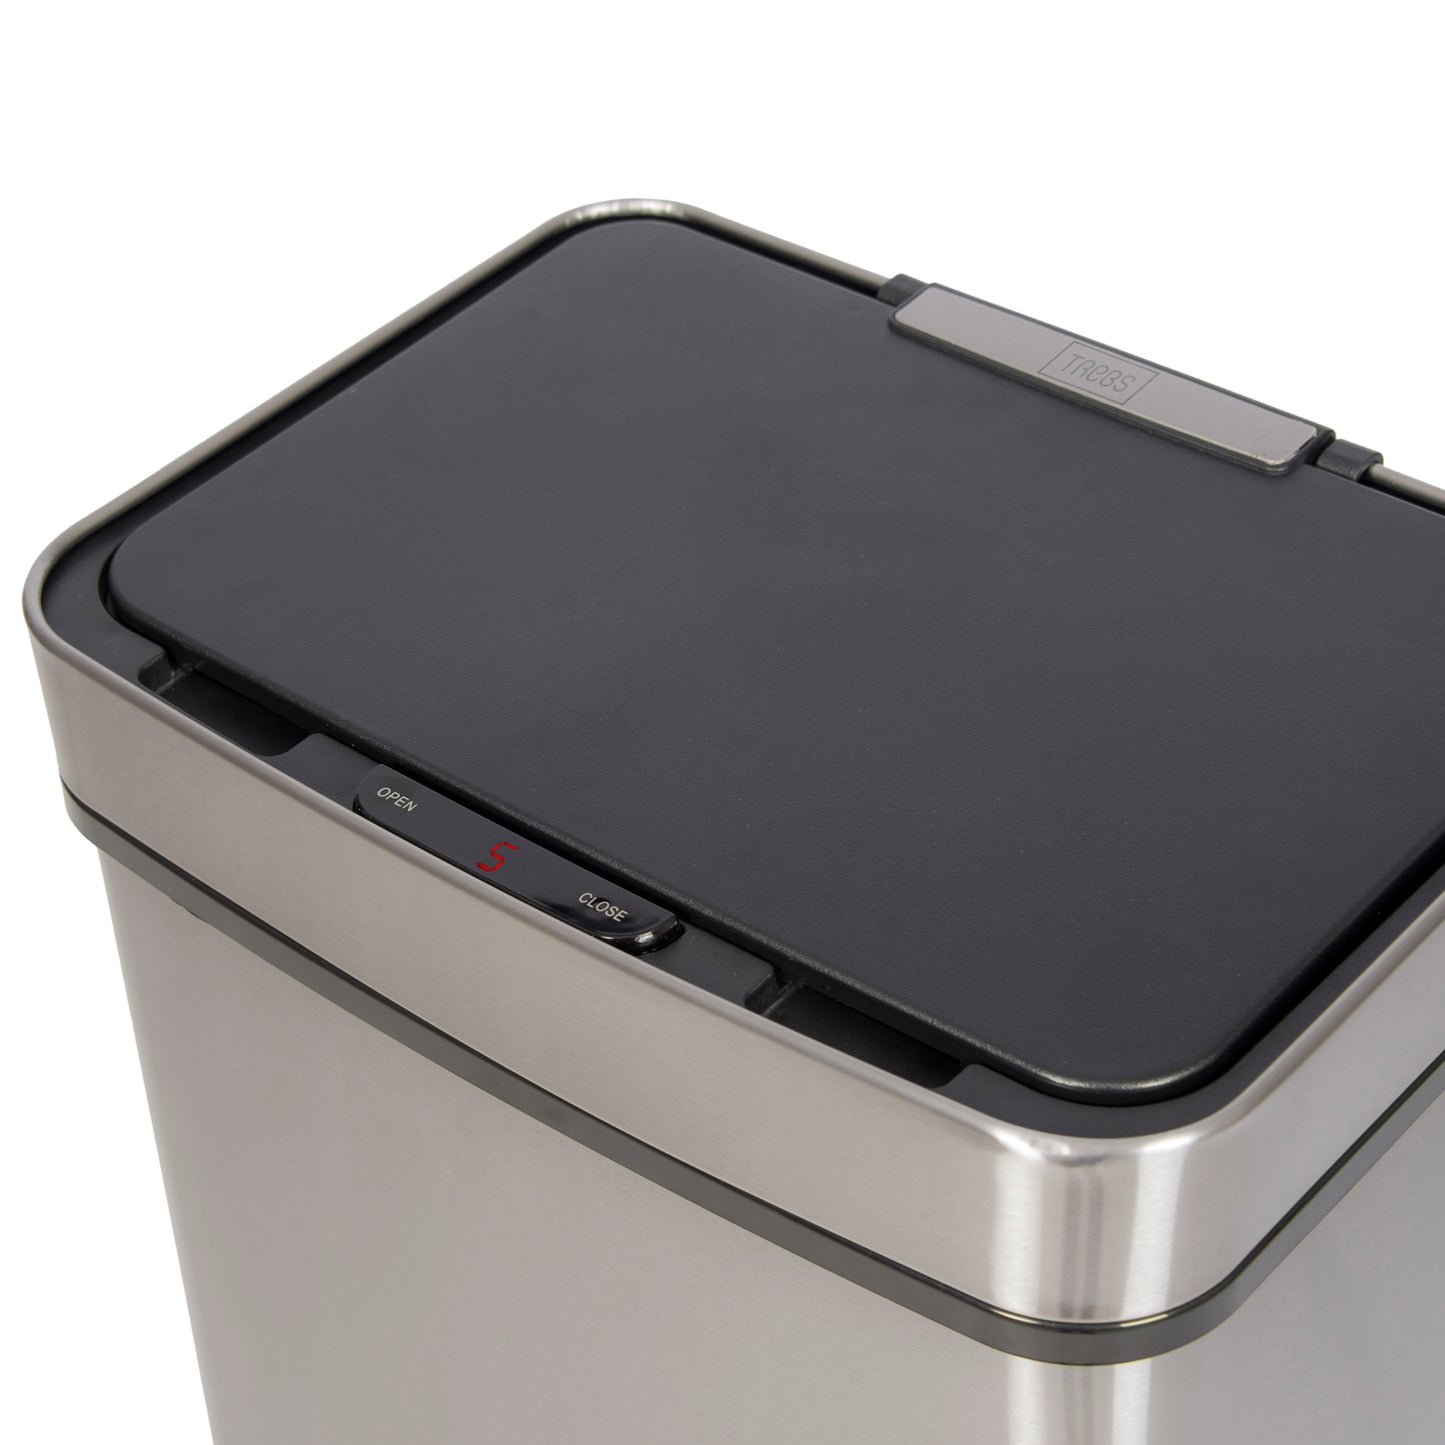 Trebs 99347 - Sensor Waste Bin / Comfortliving 65 l with 4 compartments and a drawer